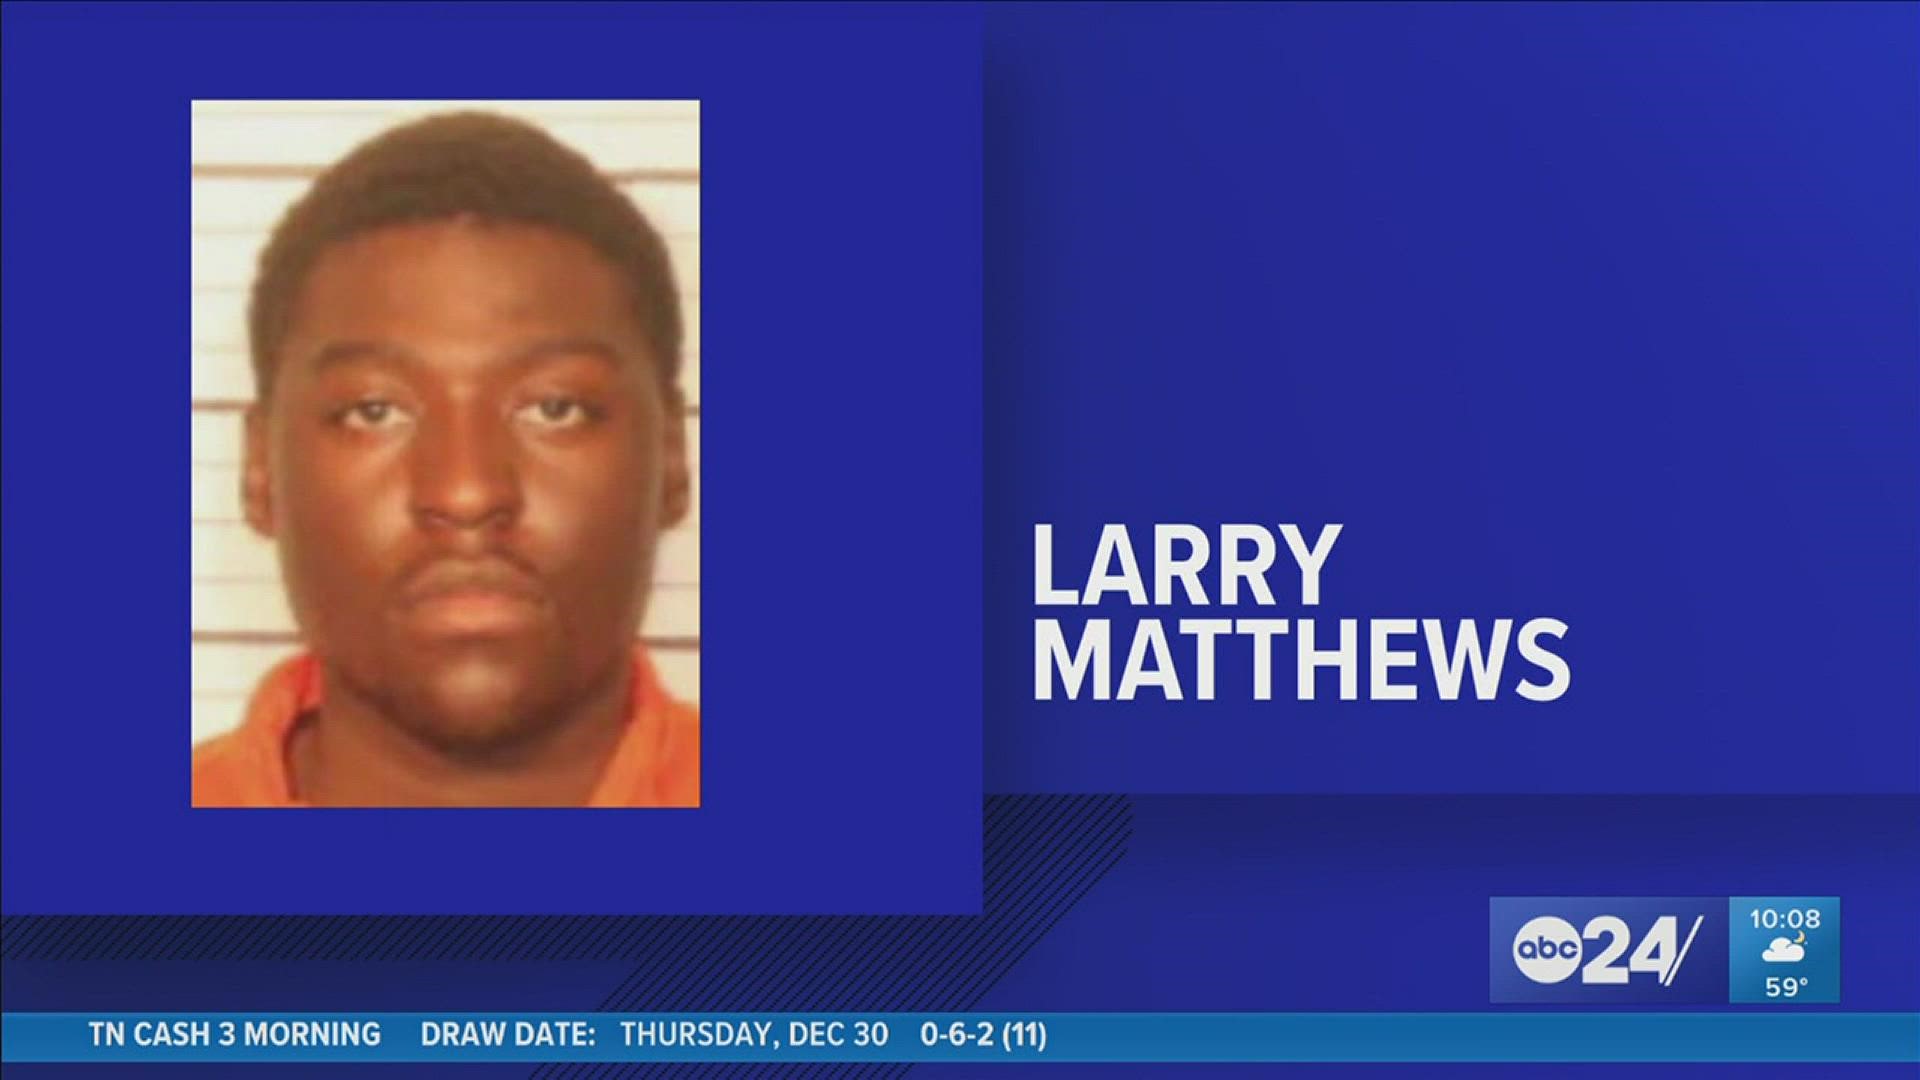 Thursday, Larry Matthews III turned himself in and is charged with domestic assault and false imprisonment